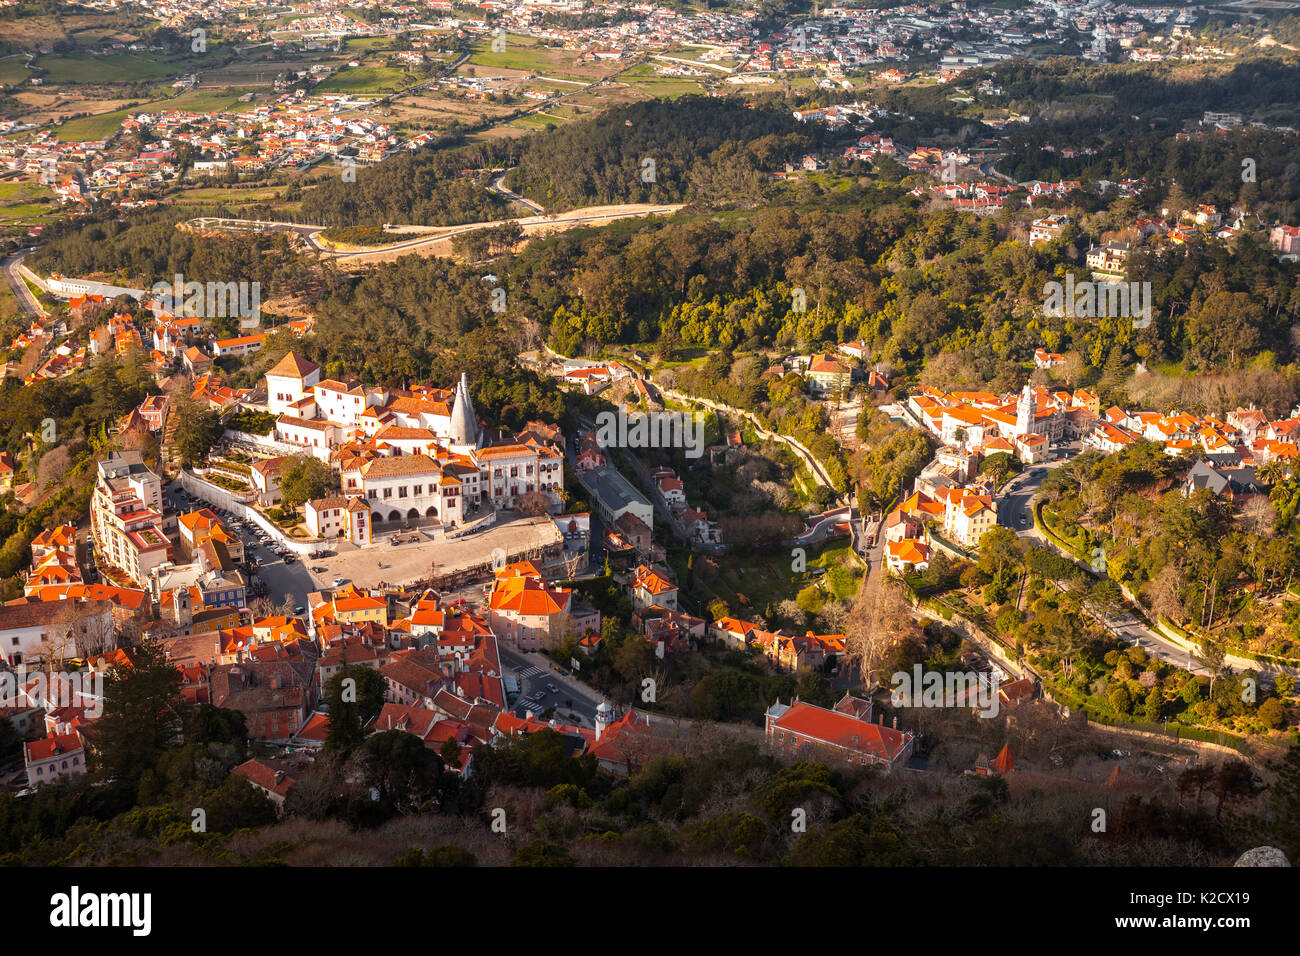 Views form Castelo dos Mouros in Sintra, Portugal Stock Photo